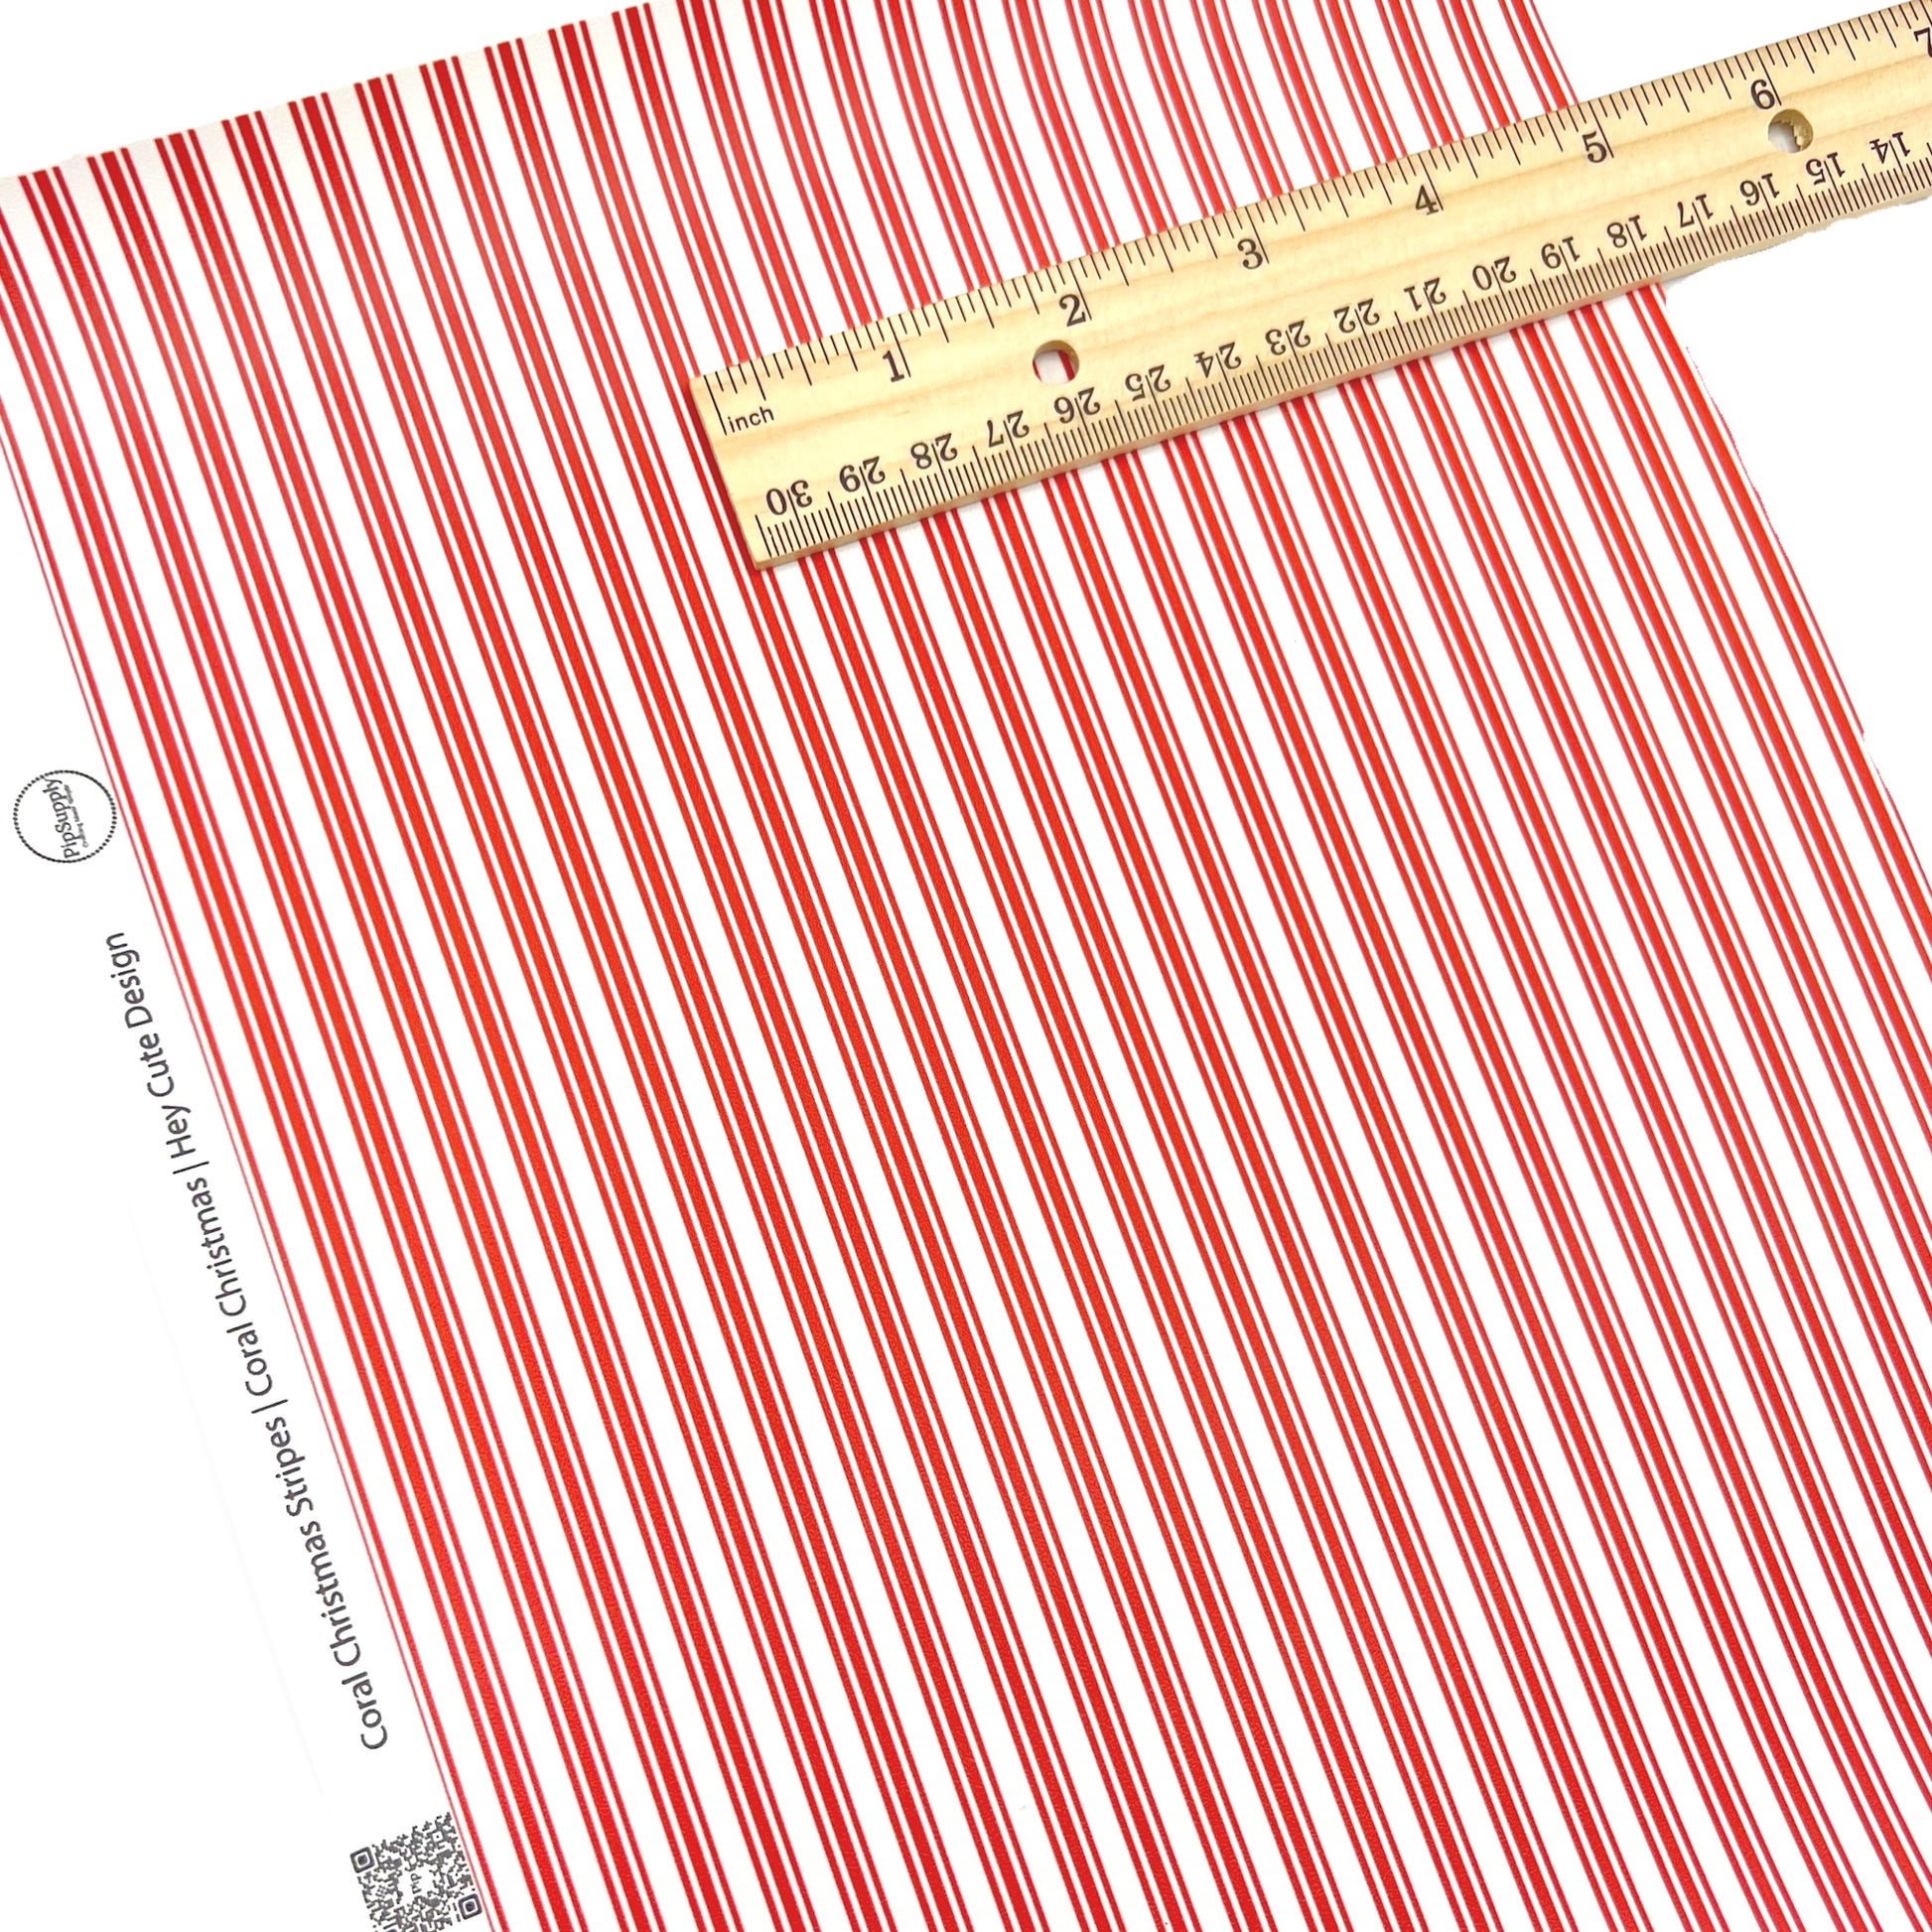 Christmas faux leather sheet with Red and white stripes